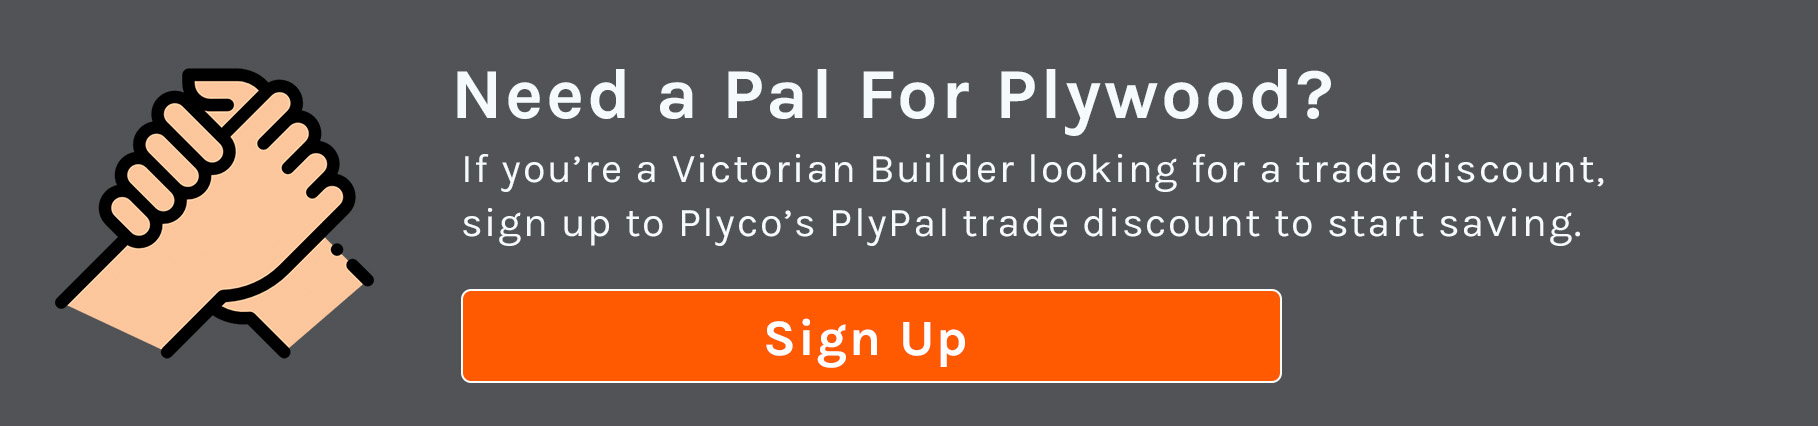 Call to action to register for Plyco's Trade Rewards Program, Plypal